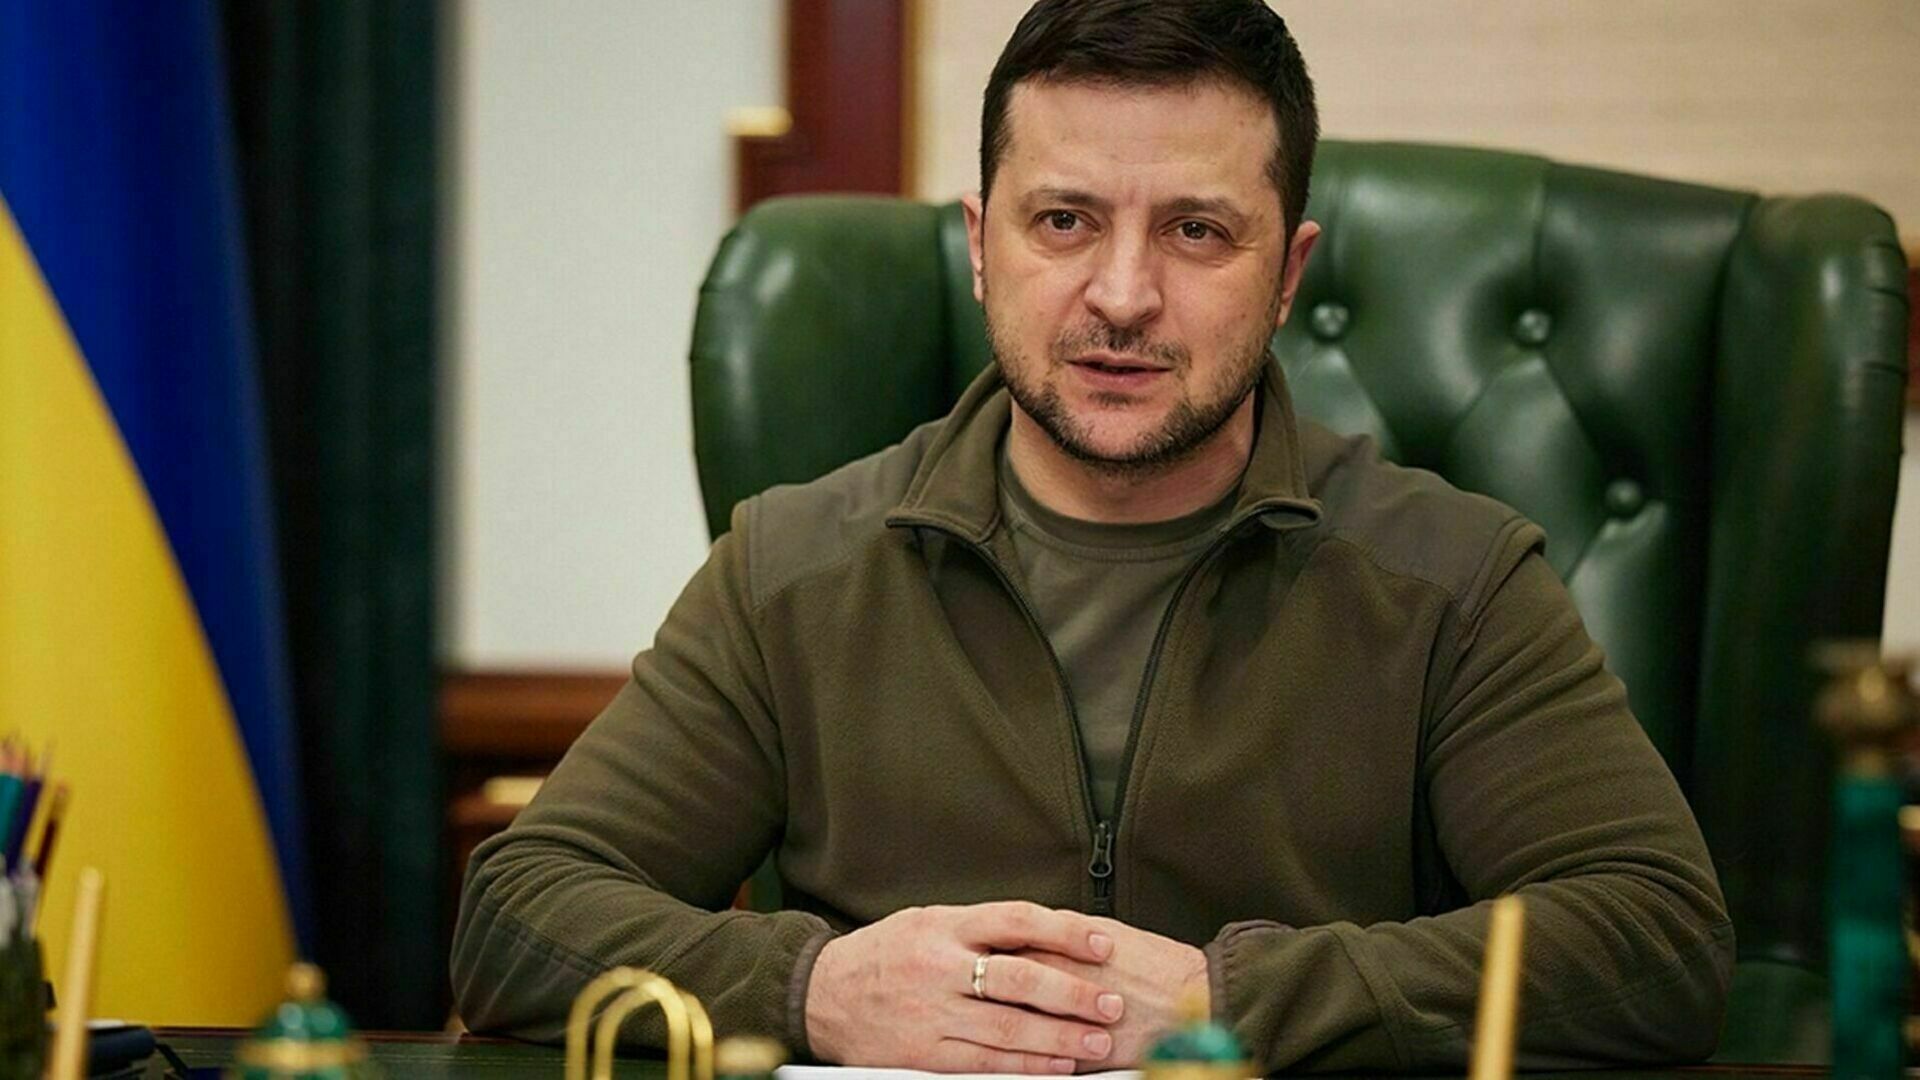 Vladimir Zelensky is waiting for the West to supply planes and missiles